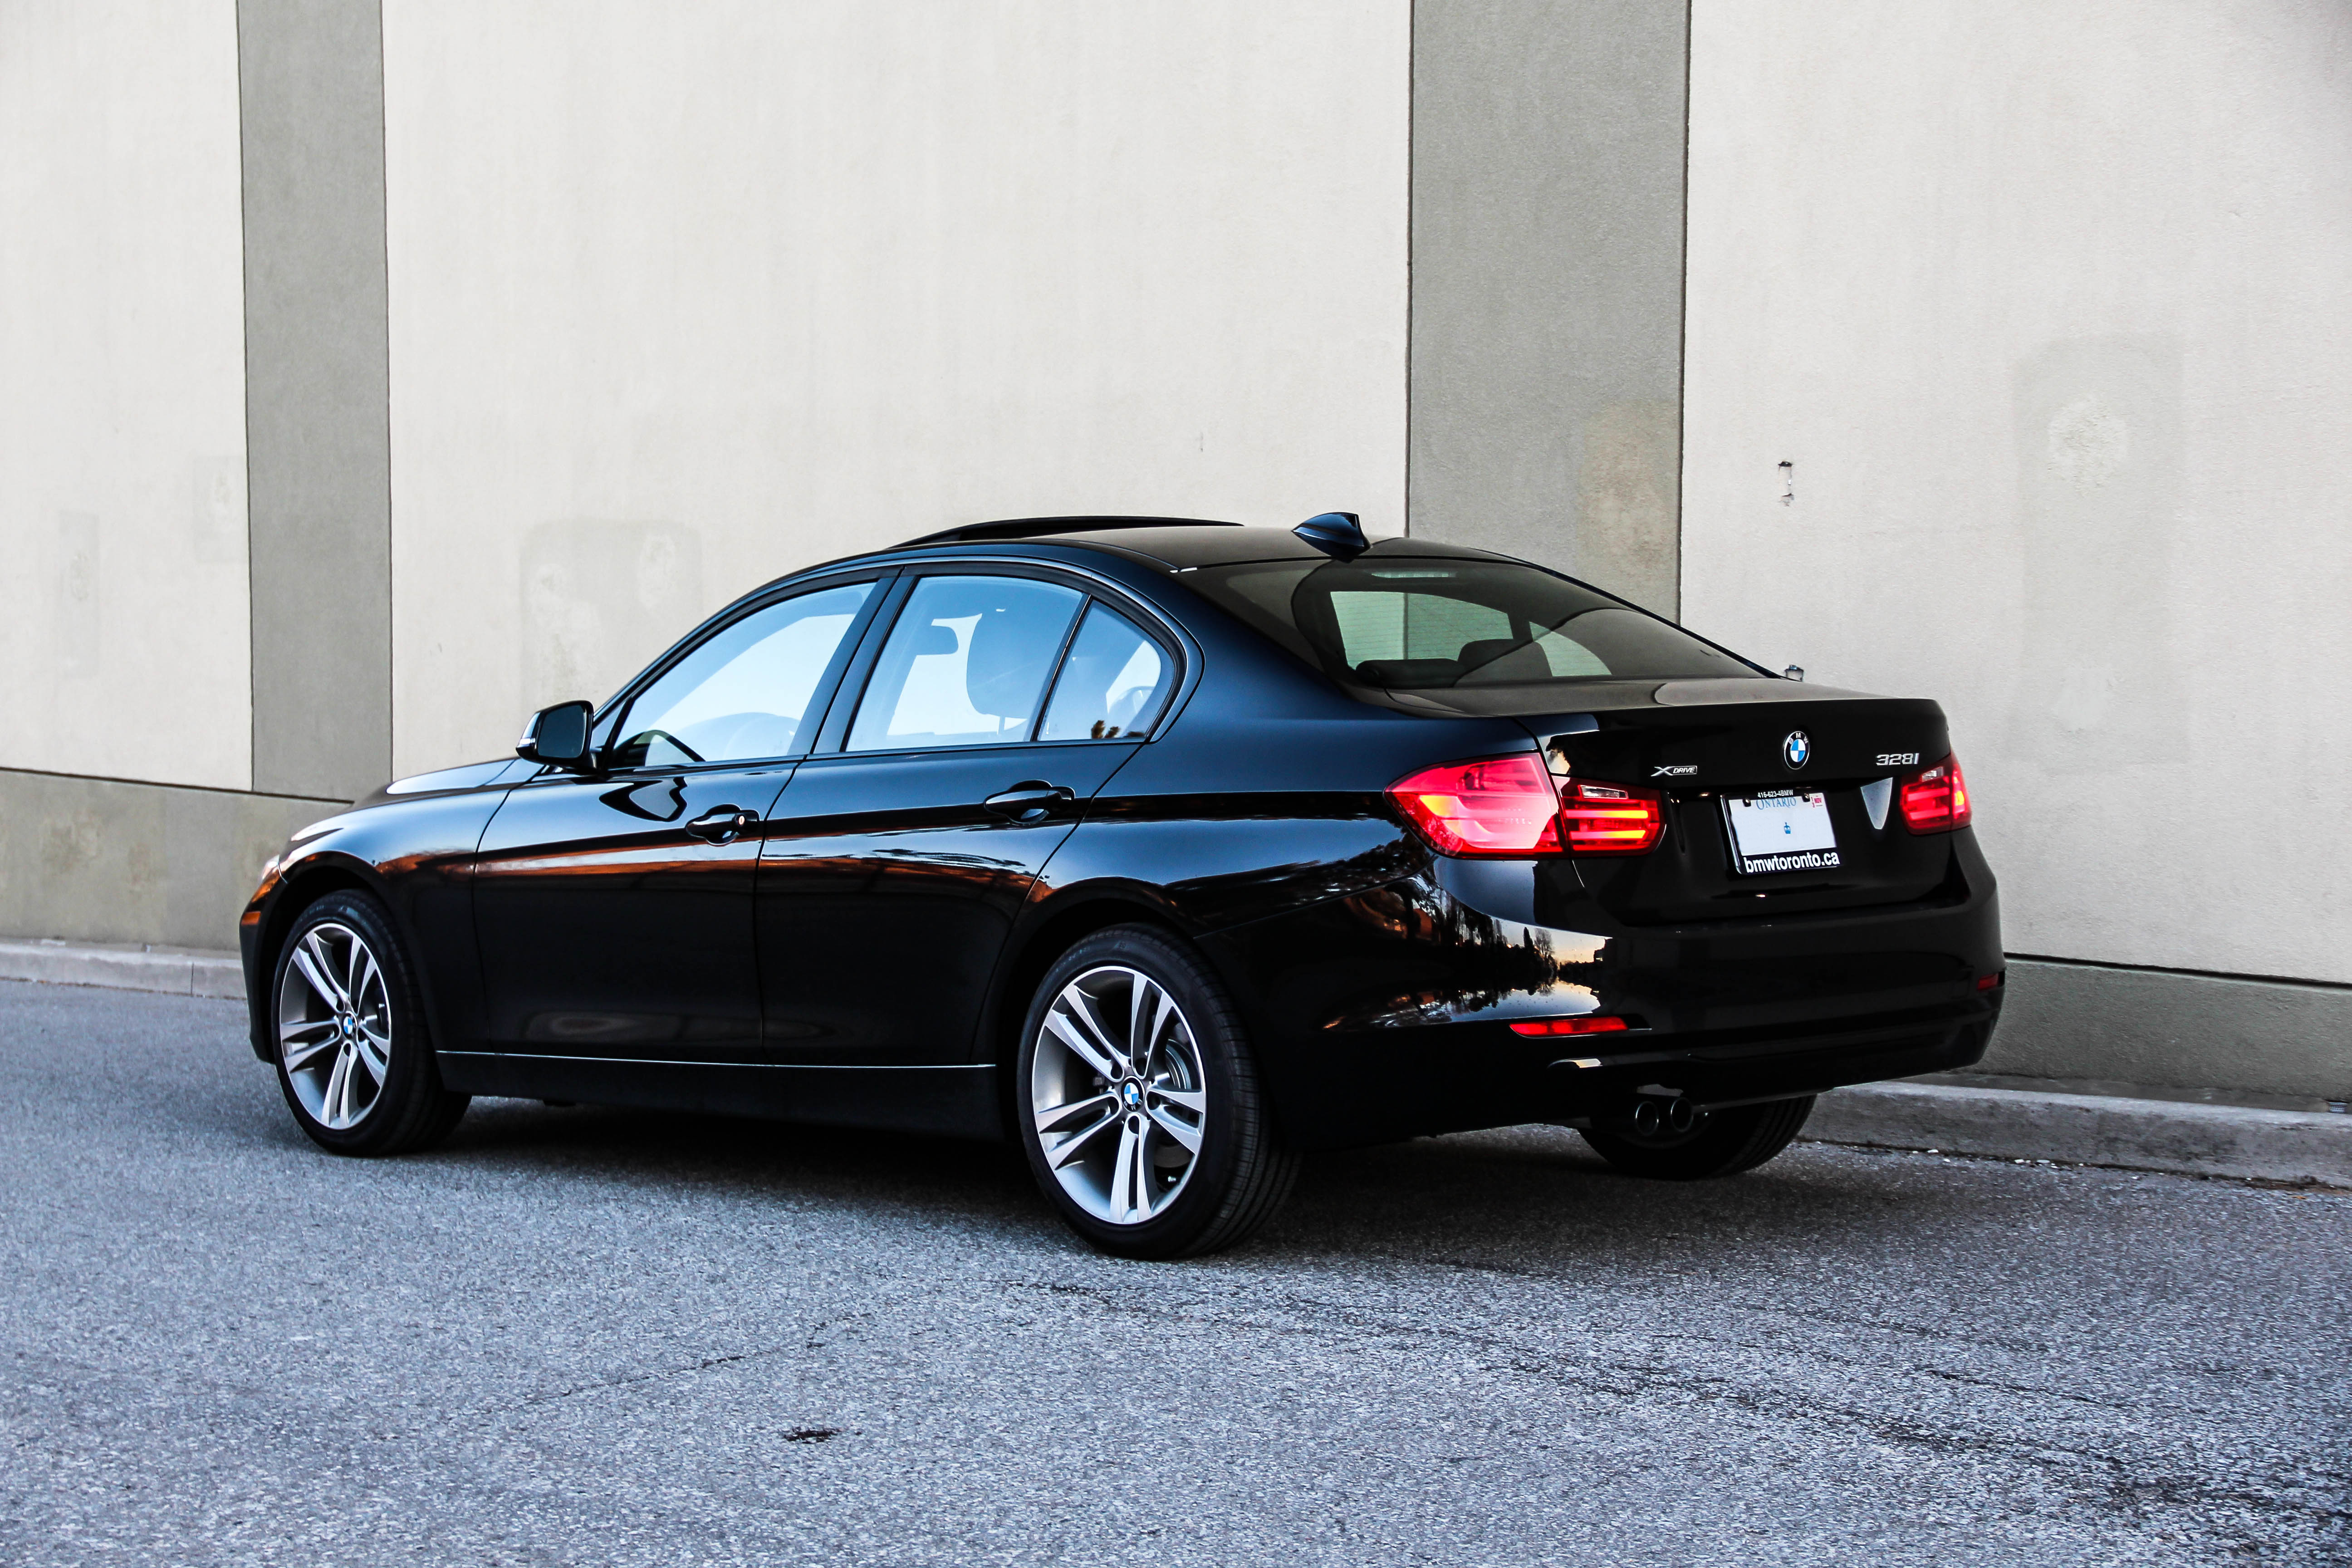 BMW 328i 2014: Review, Amazing Pictures and Images – Look at the car